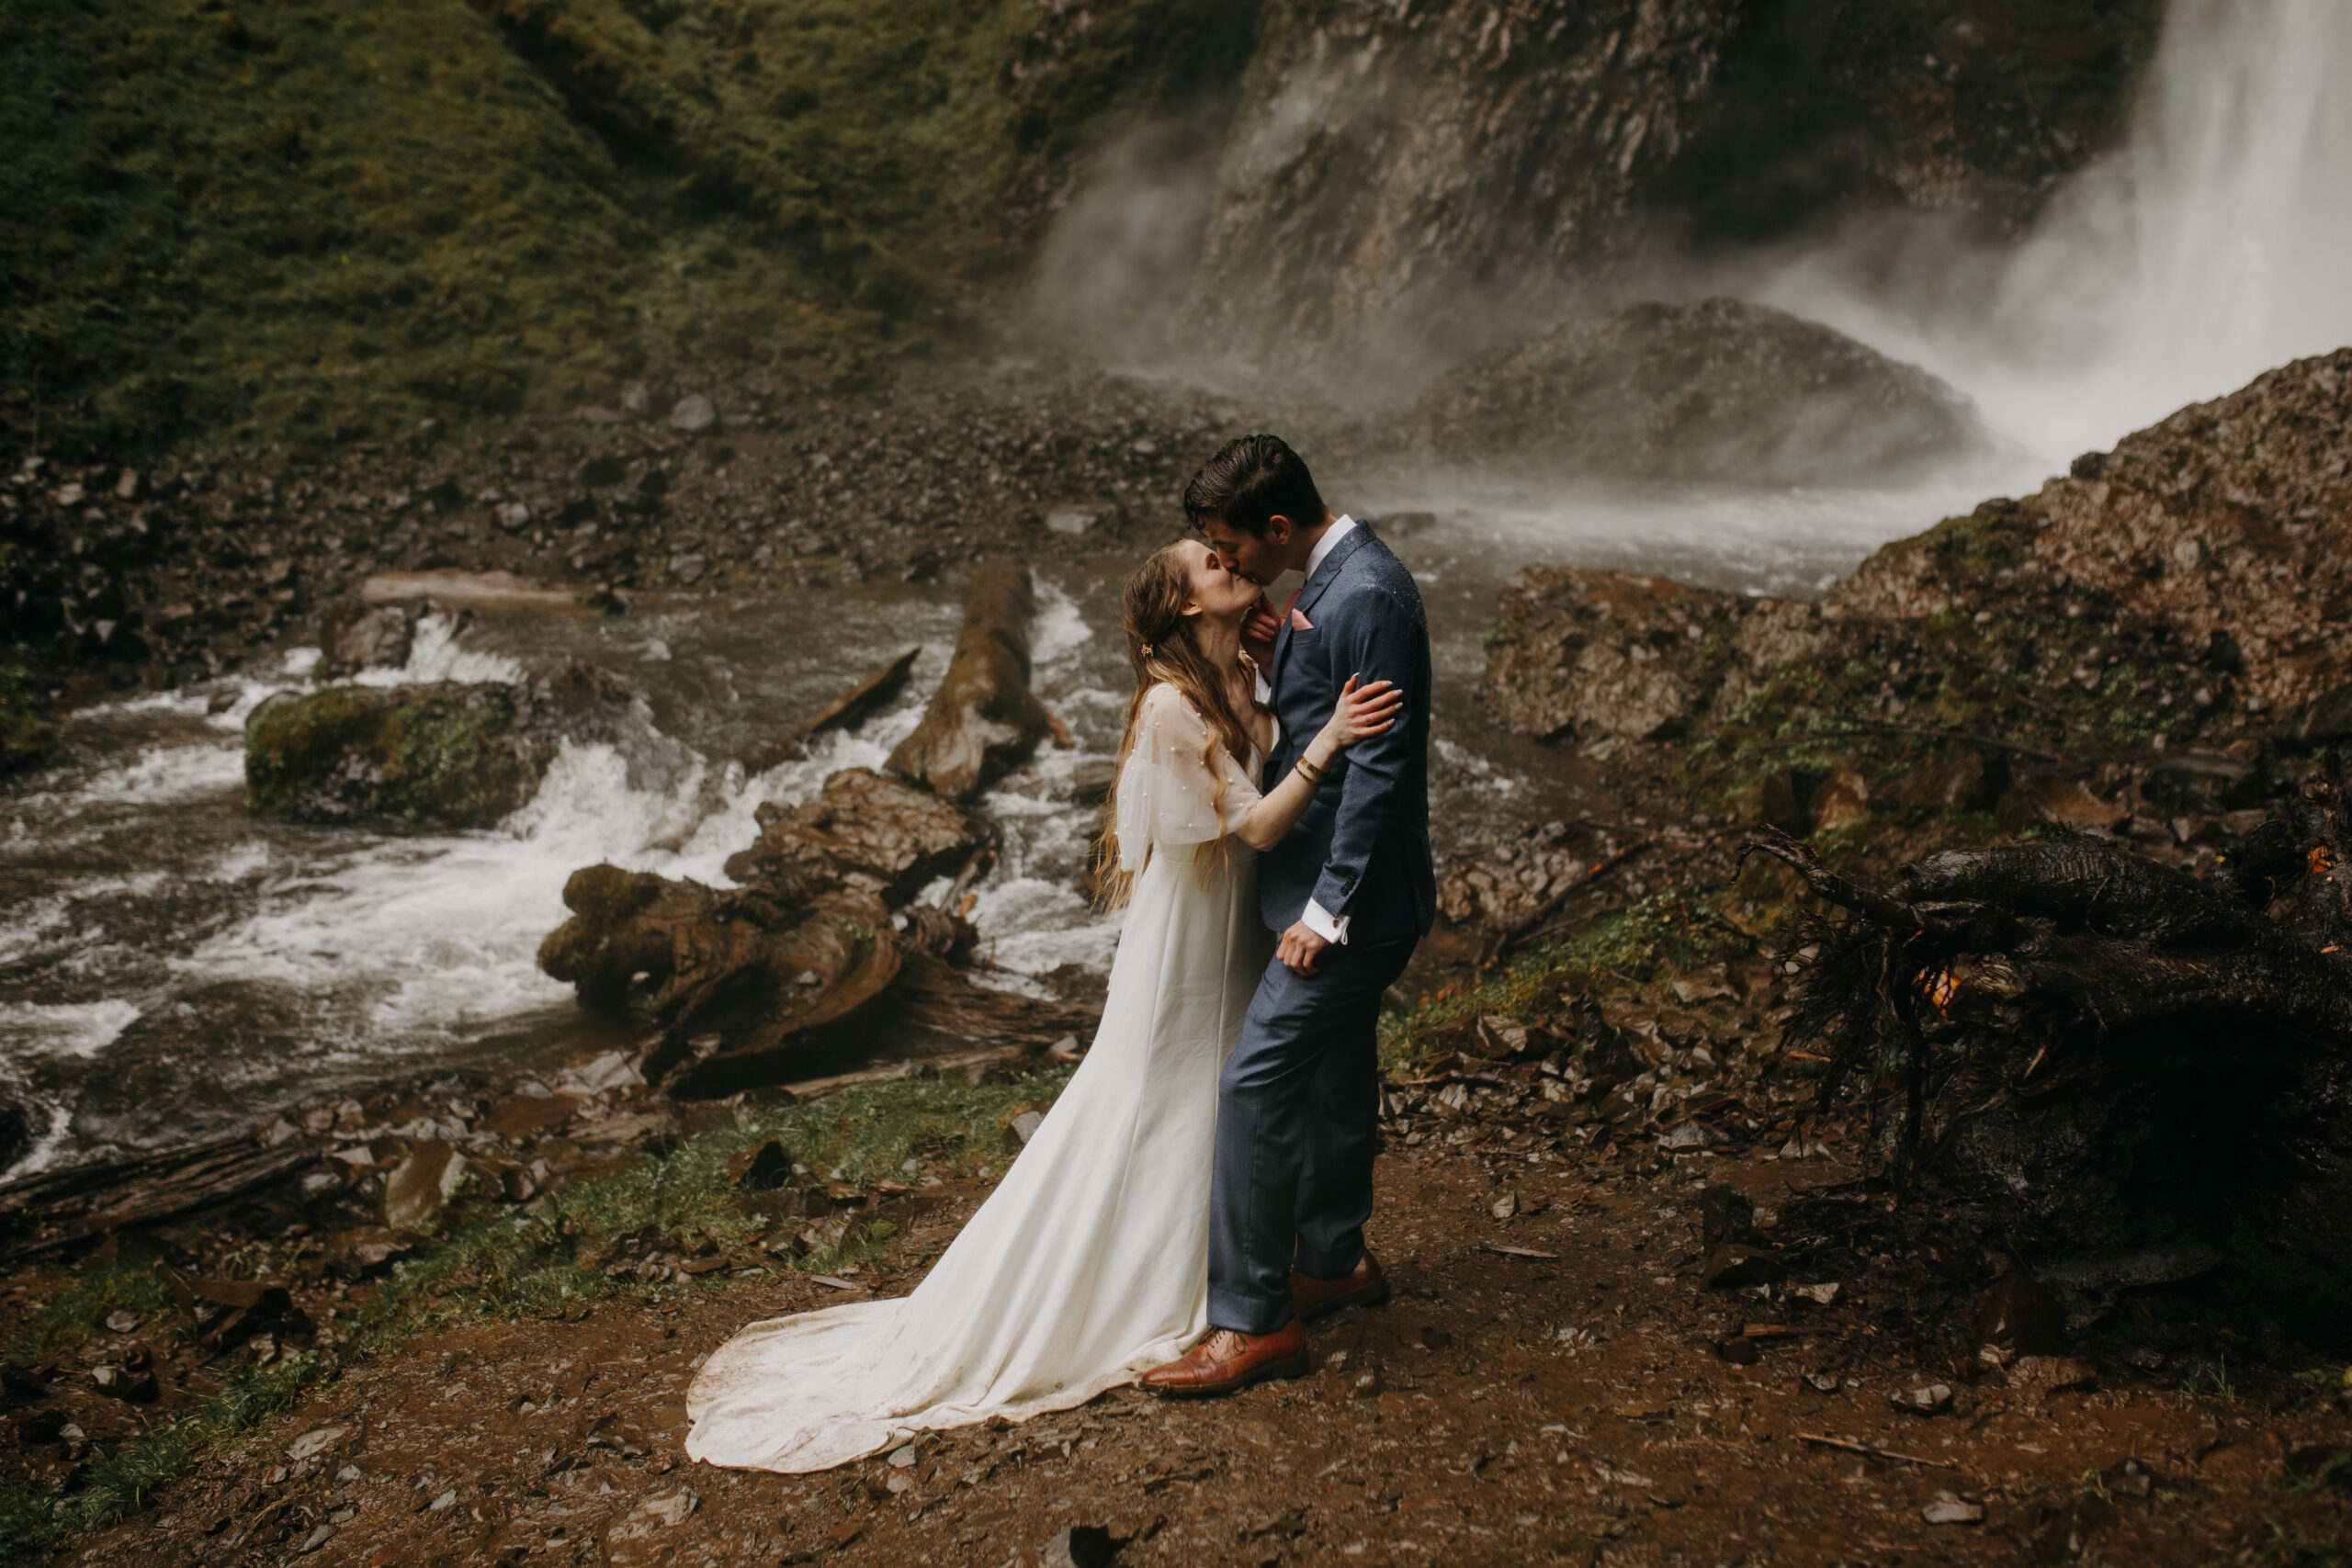 woman in white dress kisses man in blue suit outside near a waterfall on rocky shores